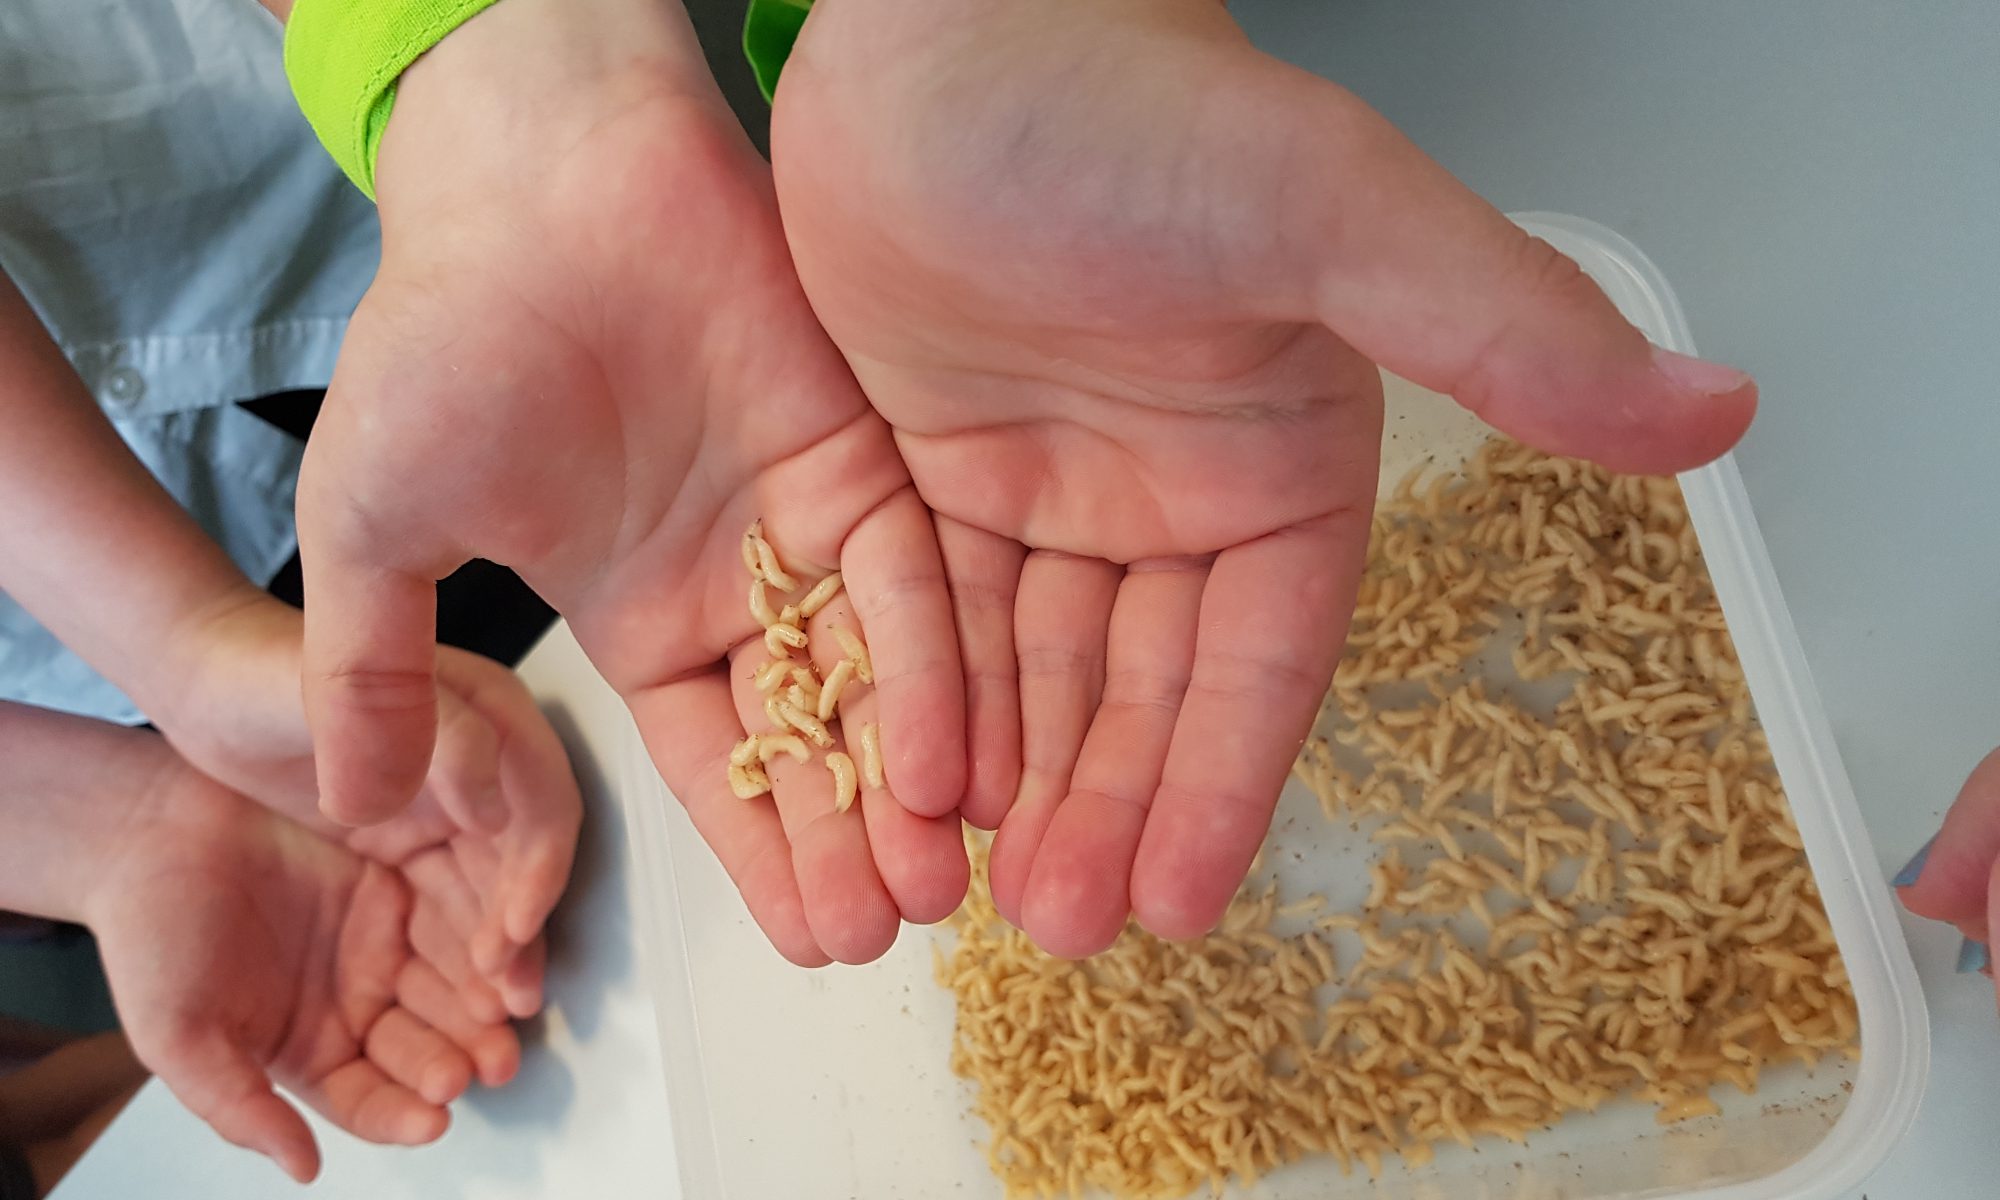 a close up kid's hands holding a handful of maggots. in the background you can see a tub of more maggots